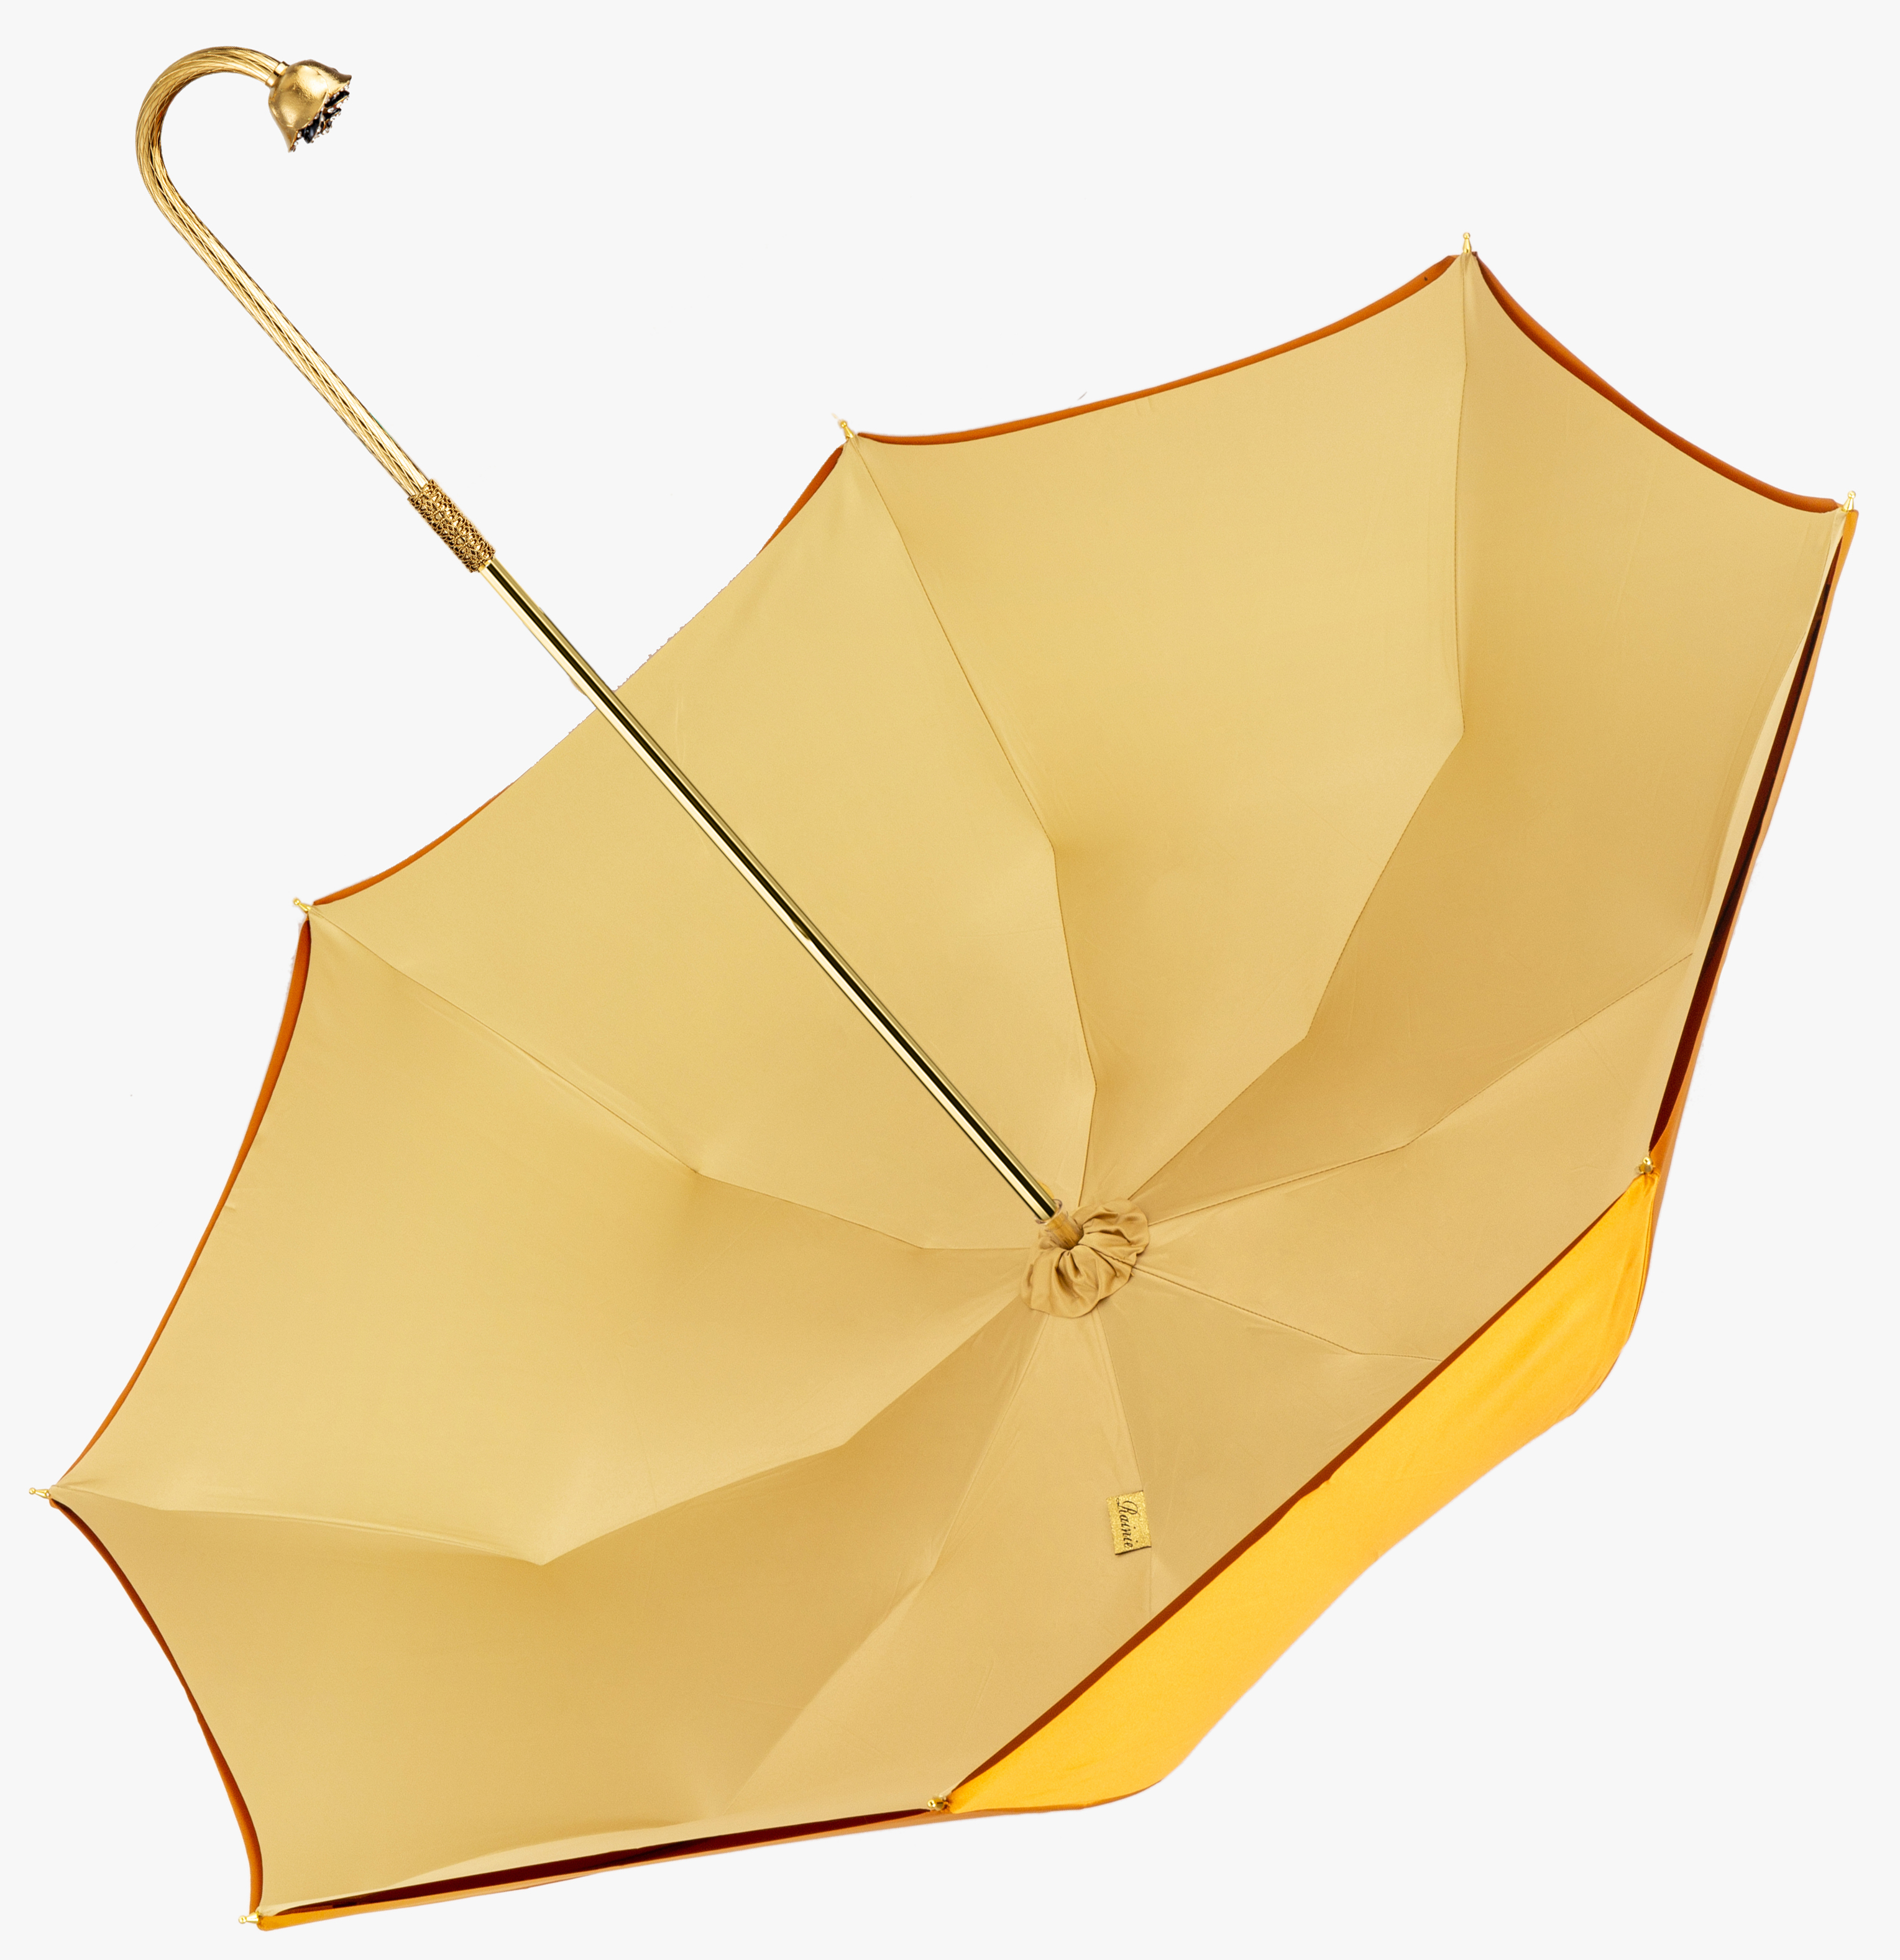 Deciduous yellow-curved rose-umbrella with long handle